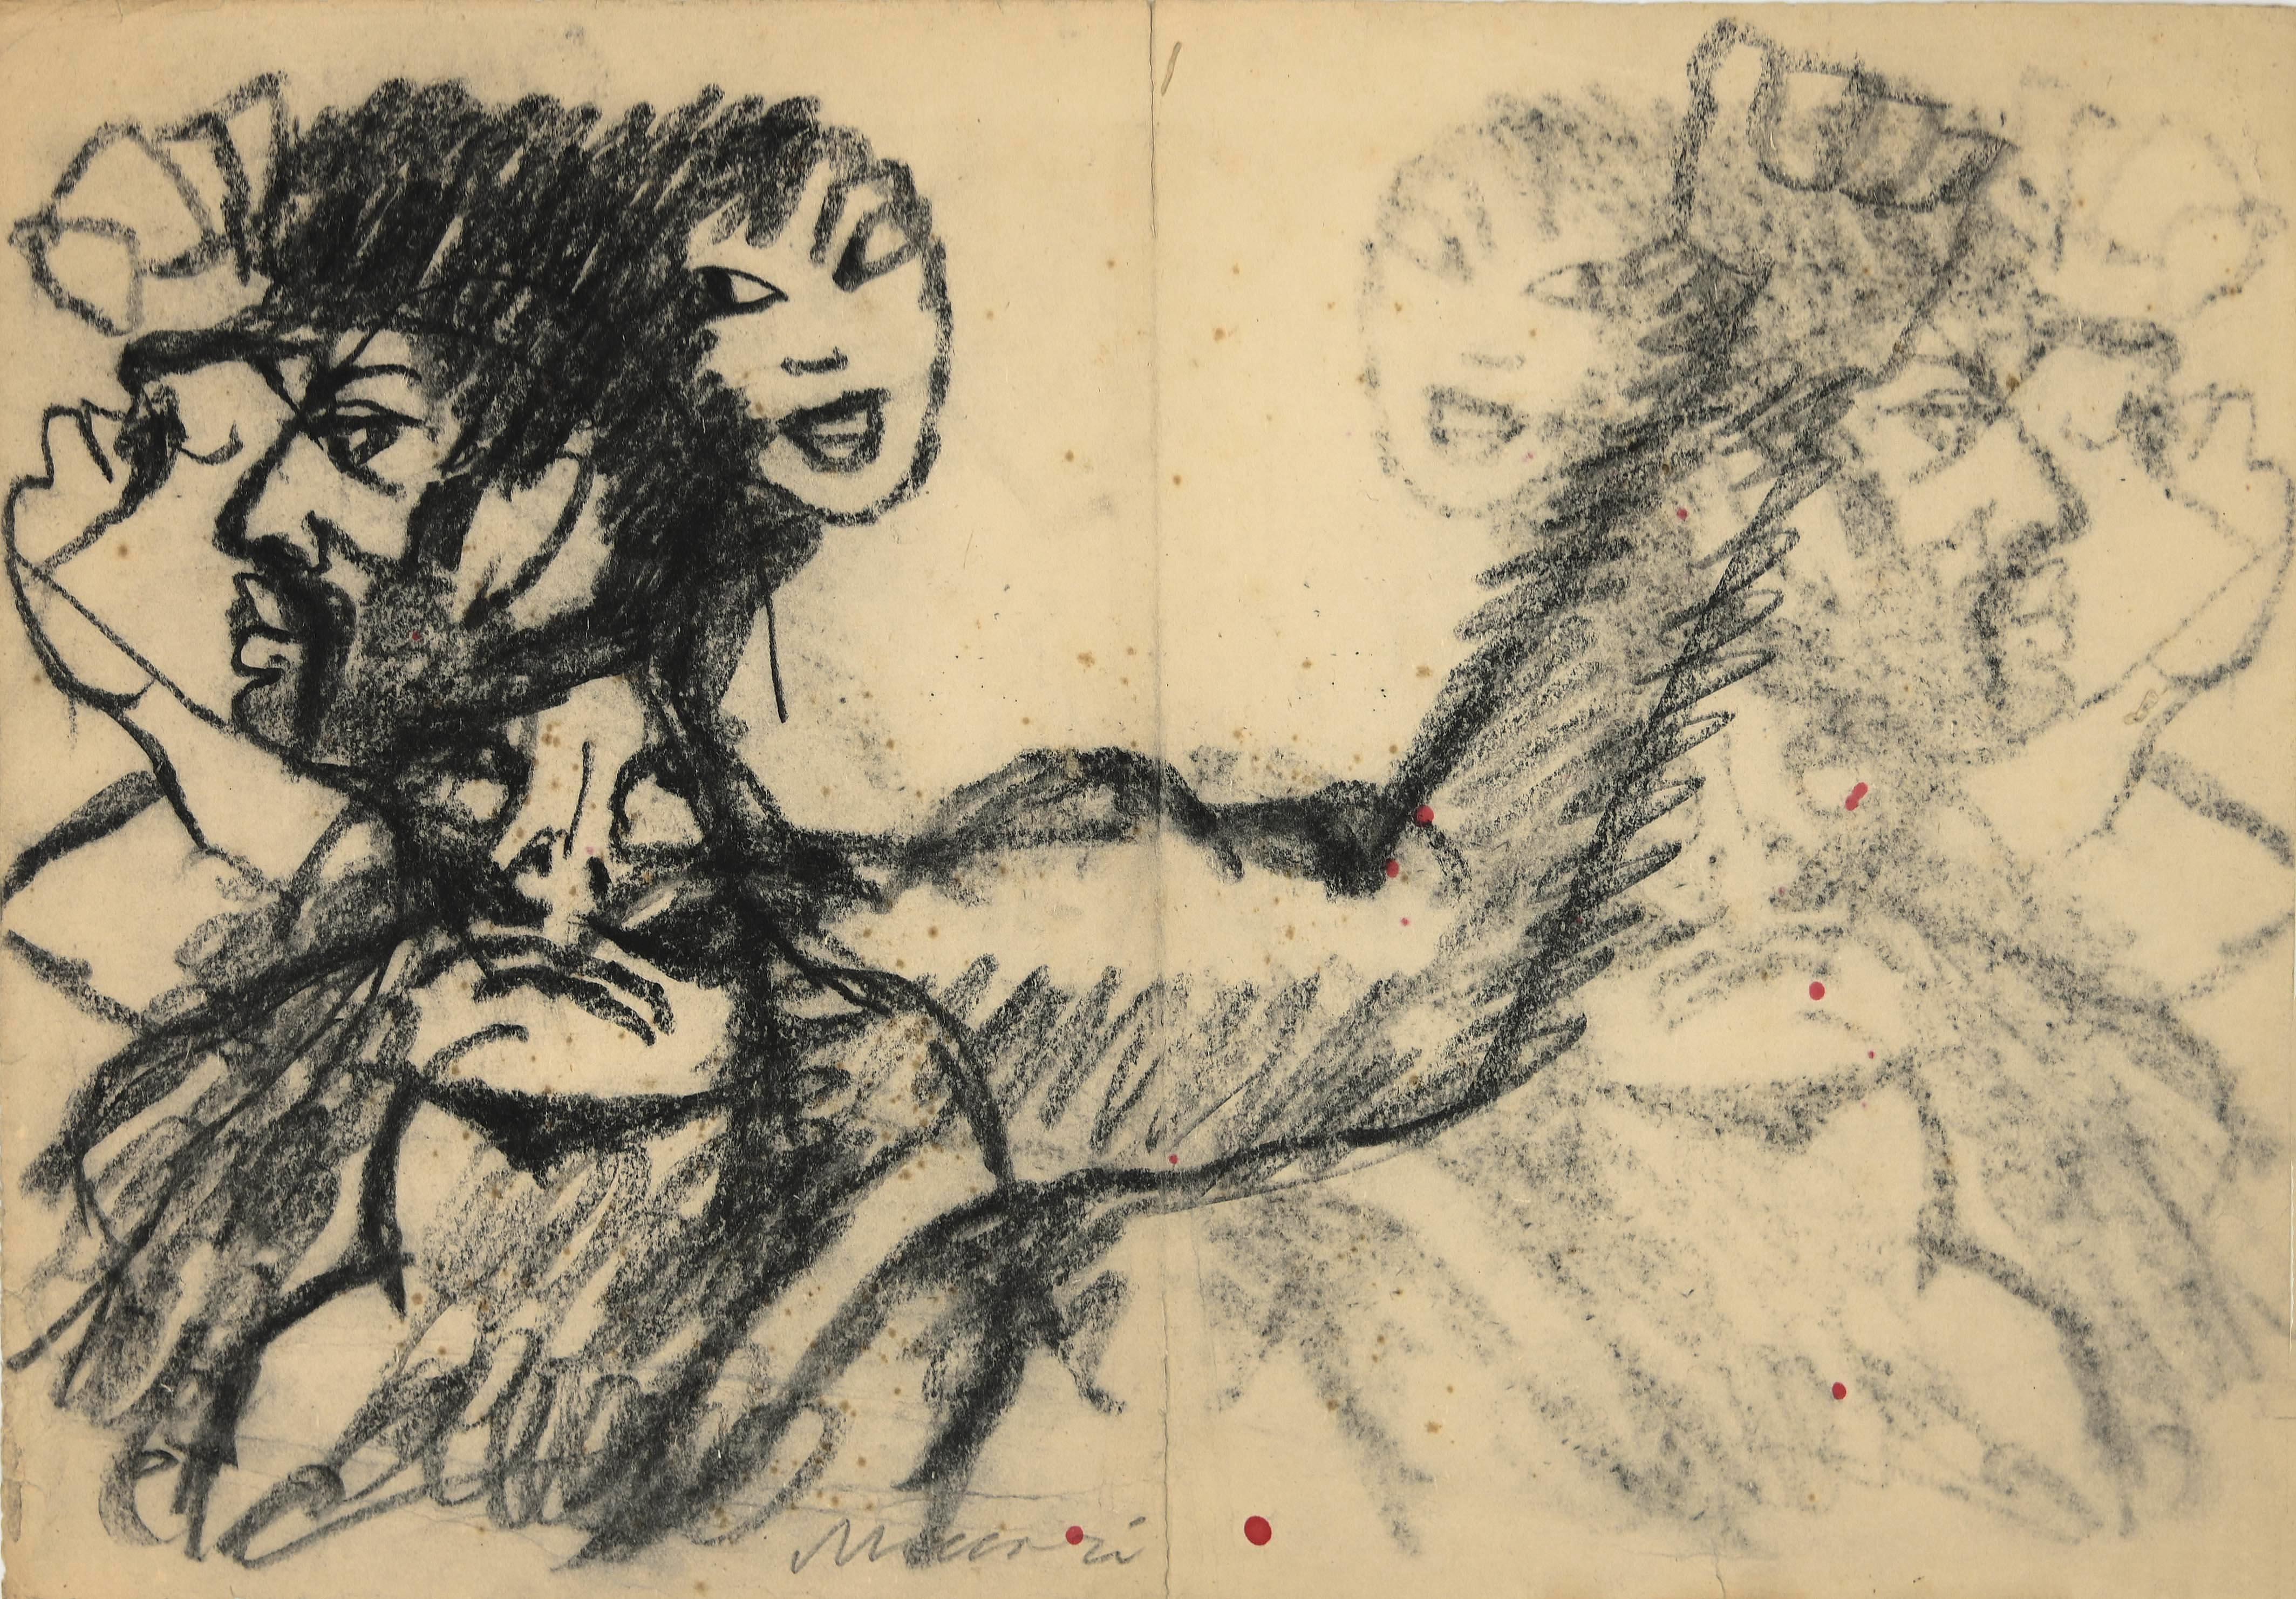 The useless attempts is an original charcoal drawing realized by Mino Maccari in 1950s.

The artwork is hand-signed by the artist in the center of the lower margin of the worn paper.

Mino Maccari was an Italian writer, painter, engraver and